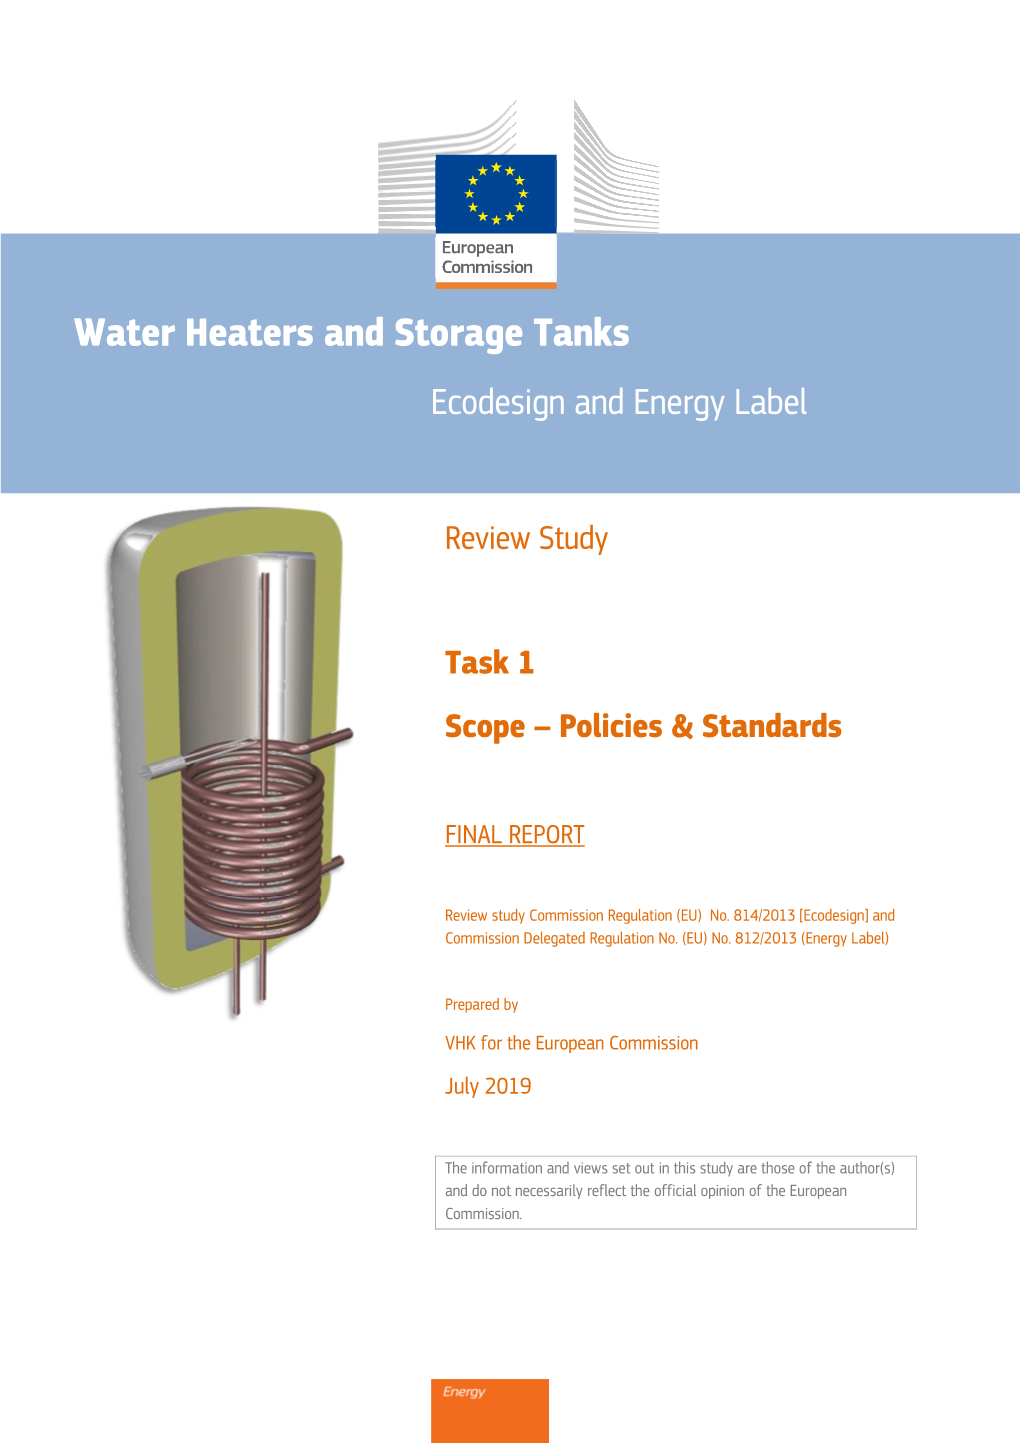 Water Heaters and Storage Tanks Ecodesign and Energy Label